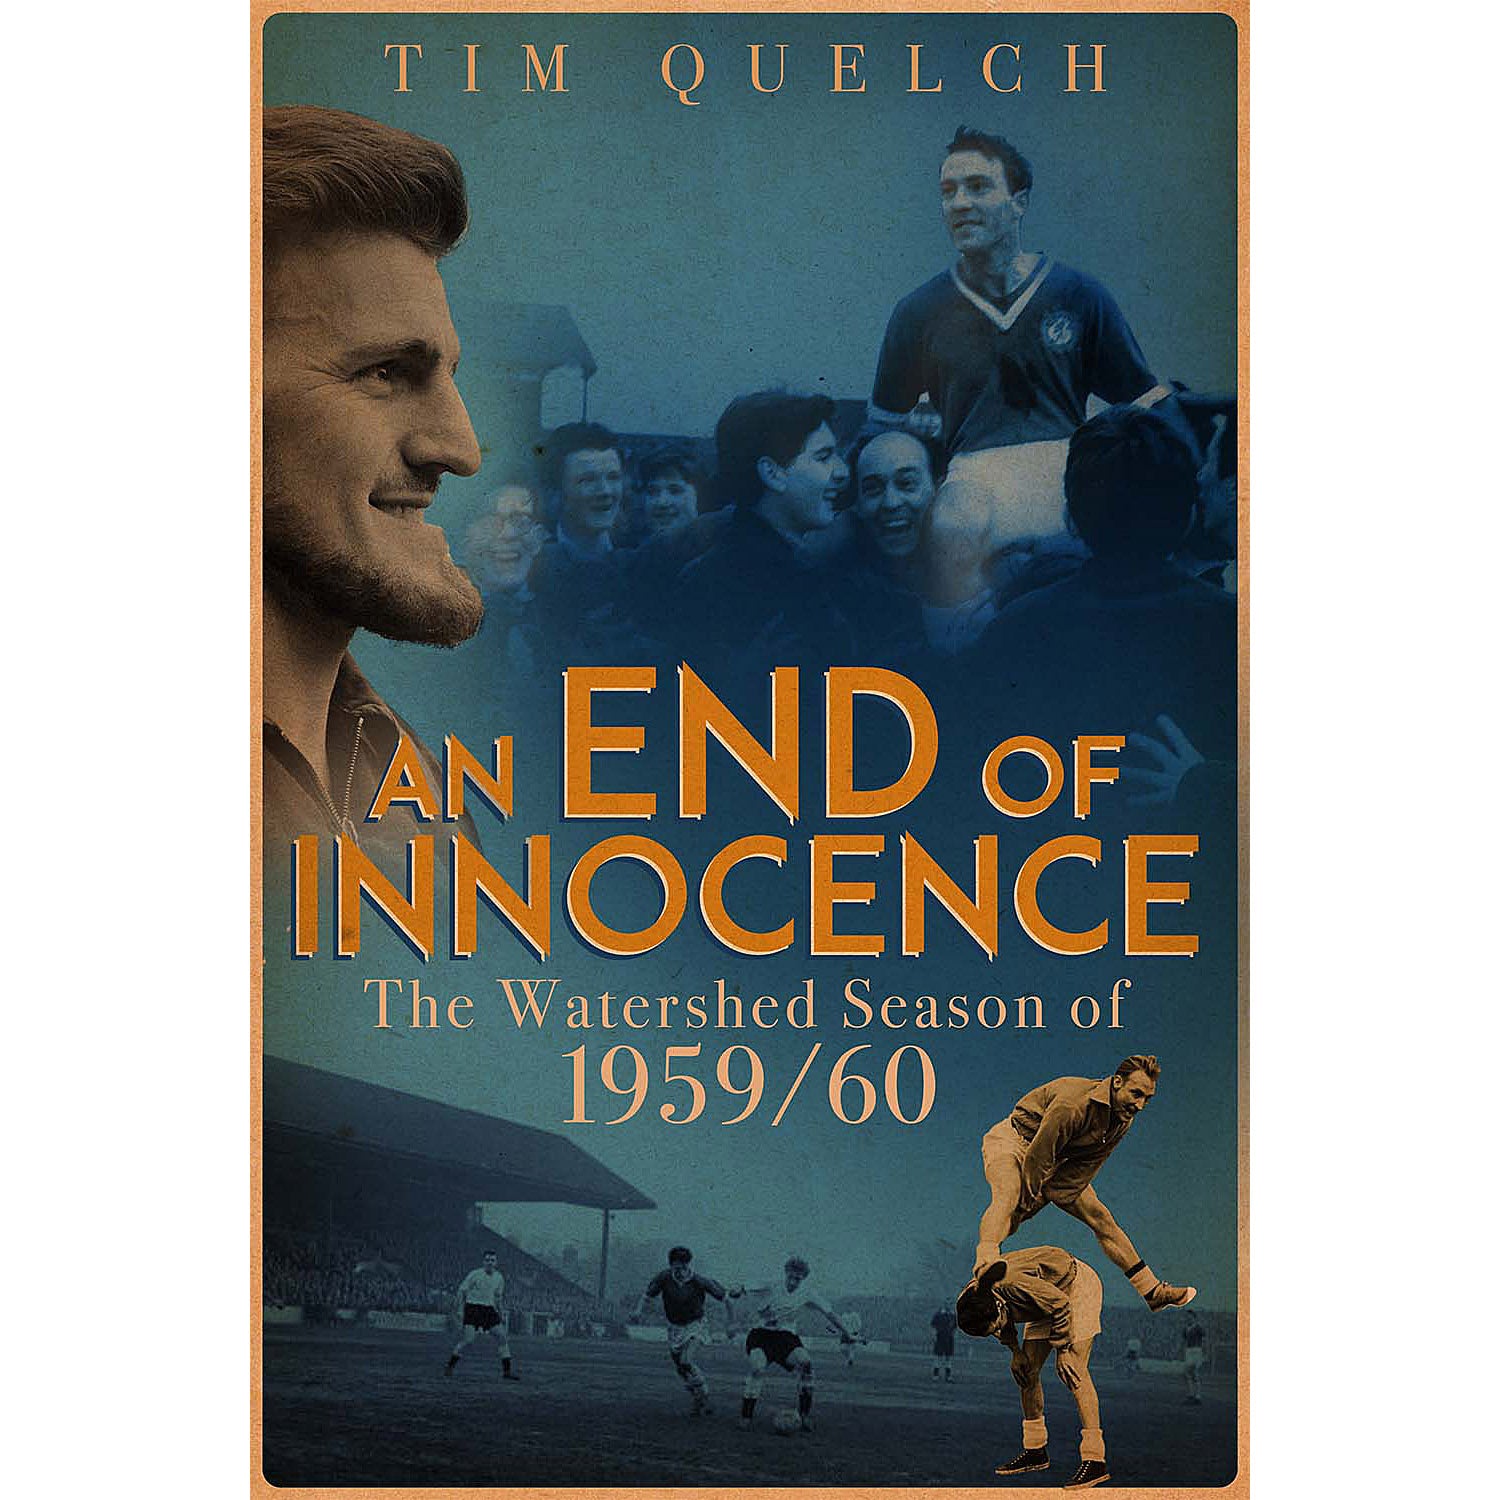 An End of Innocence – The Watershed Season of 1959/60